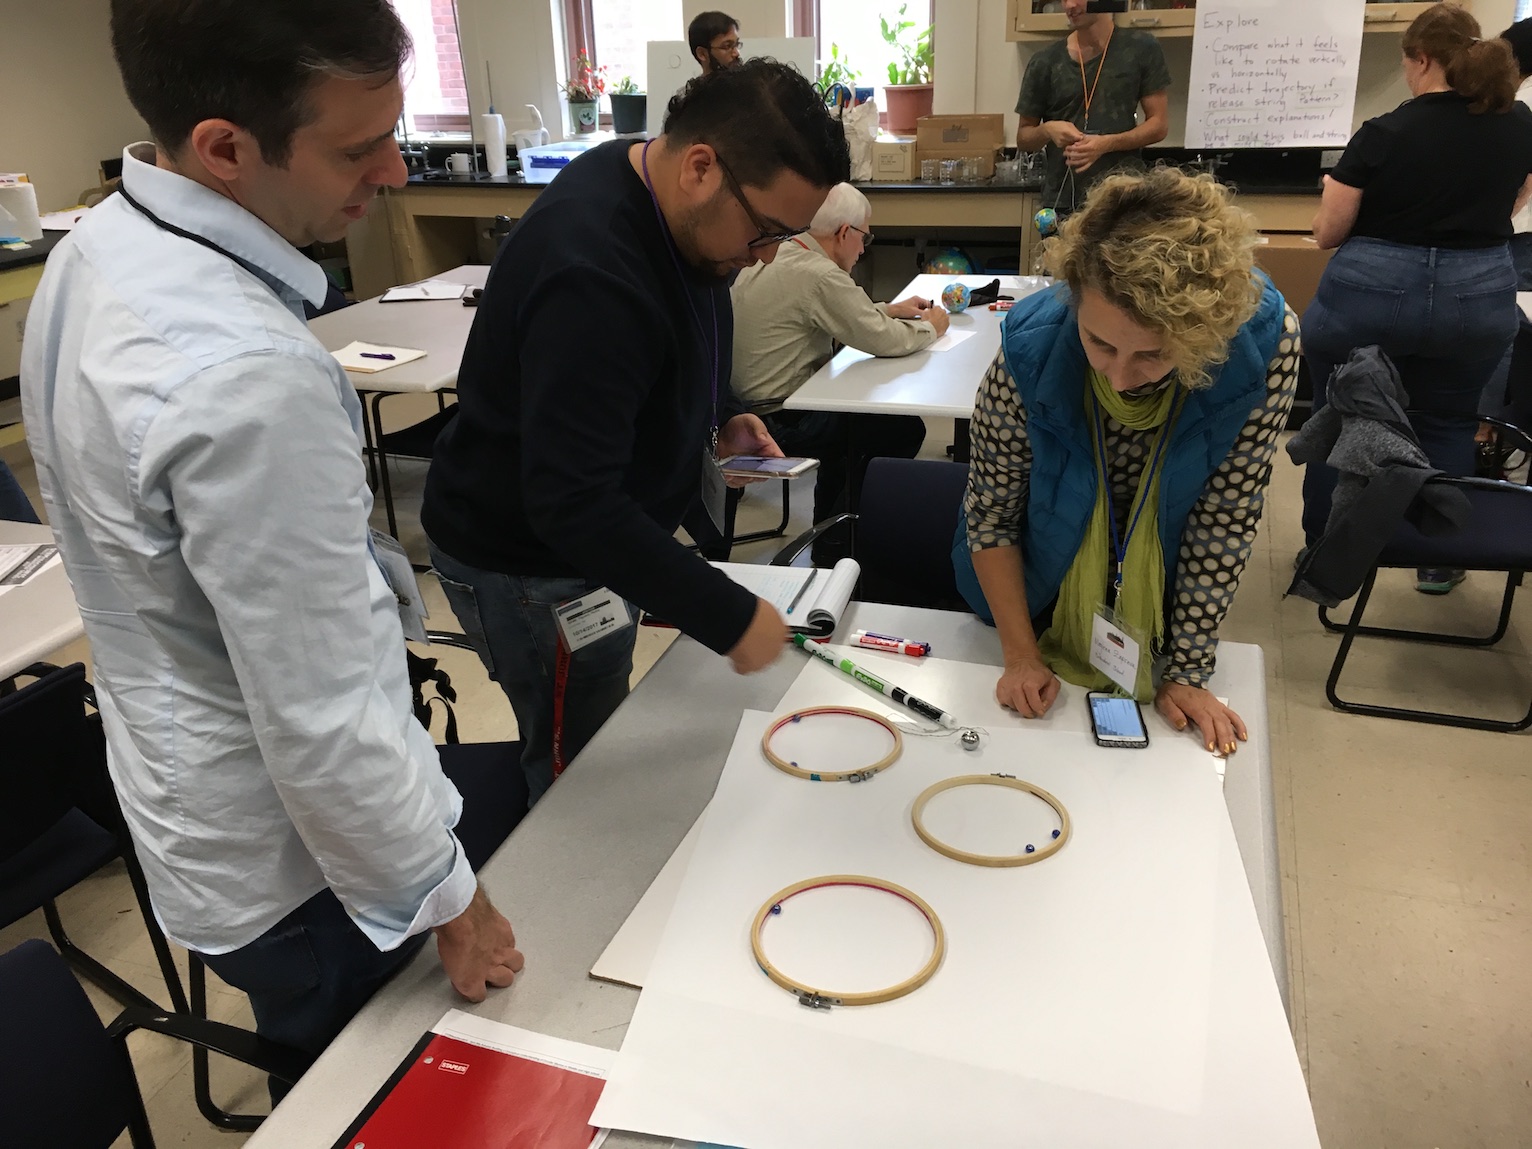 Designing for Discourse and Sensemaking in Physics Class